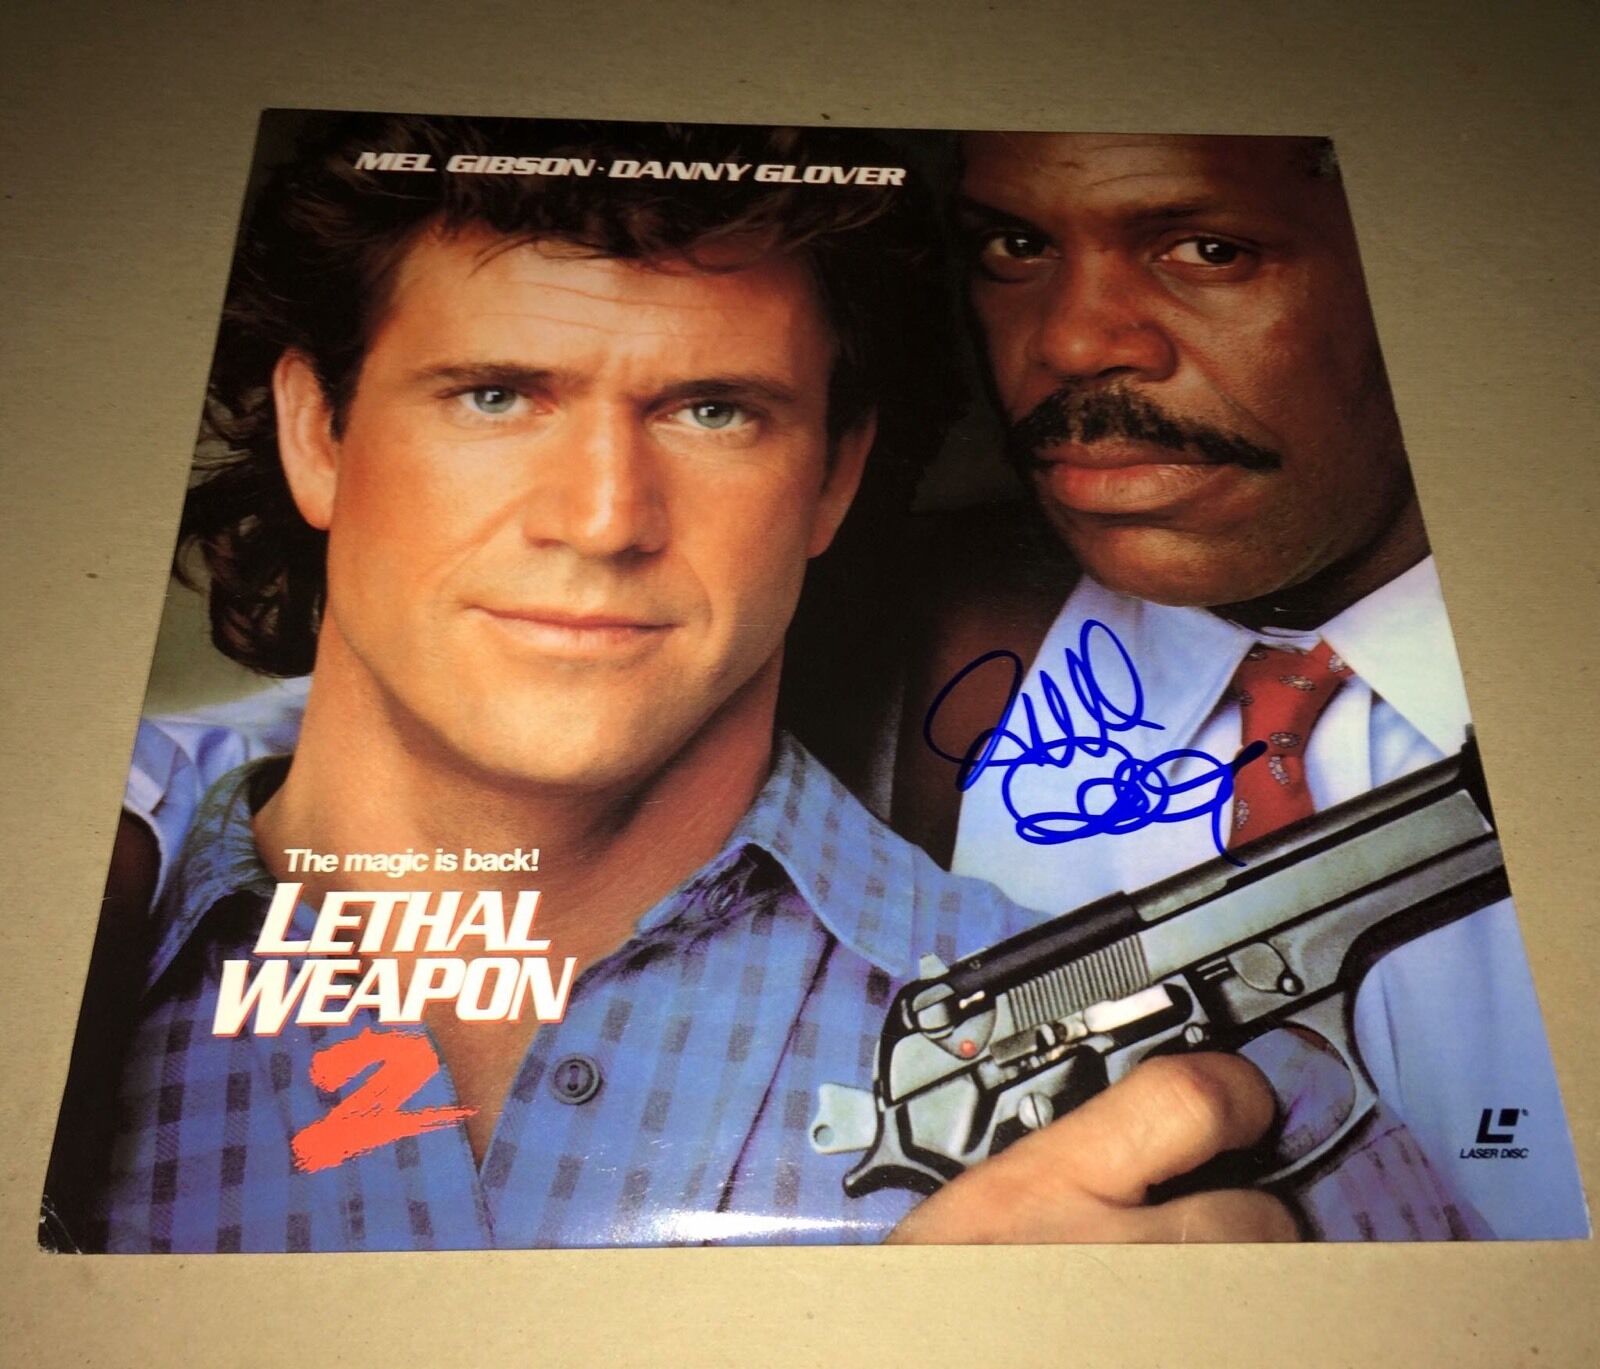 Richard Donner Lethal Weapon 2 - Signed Laserdisc Authentic IN PERSON